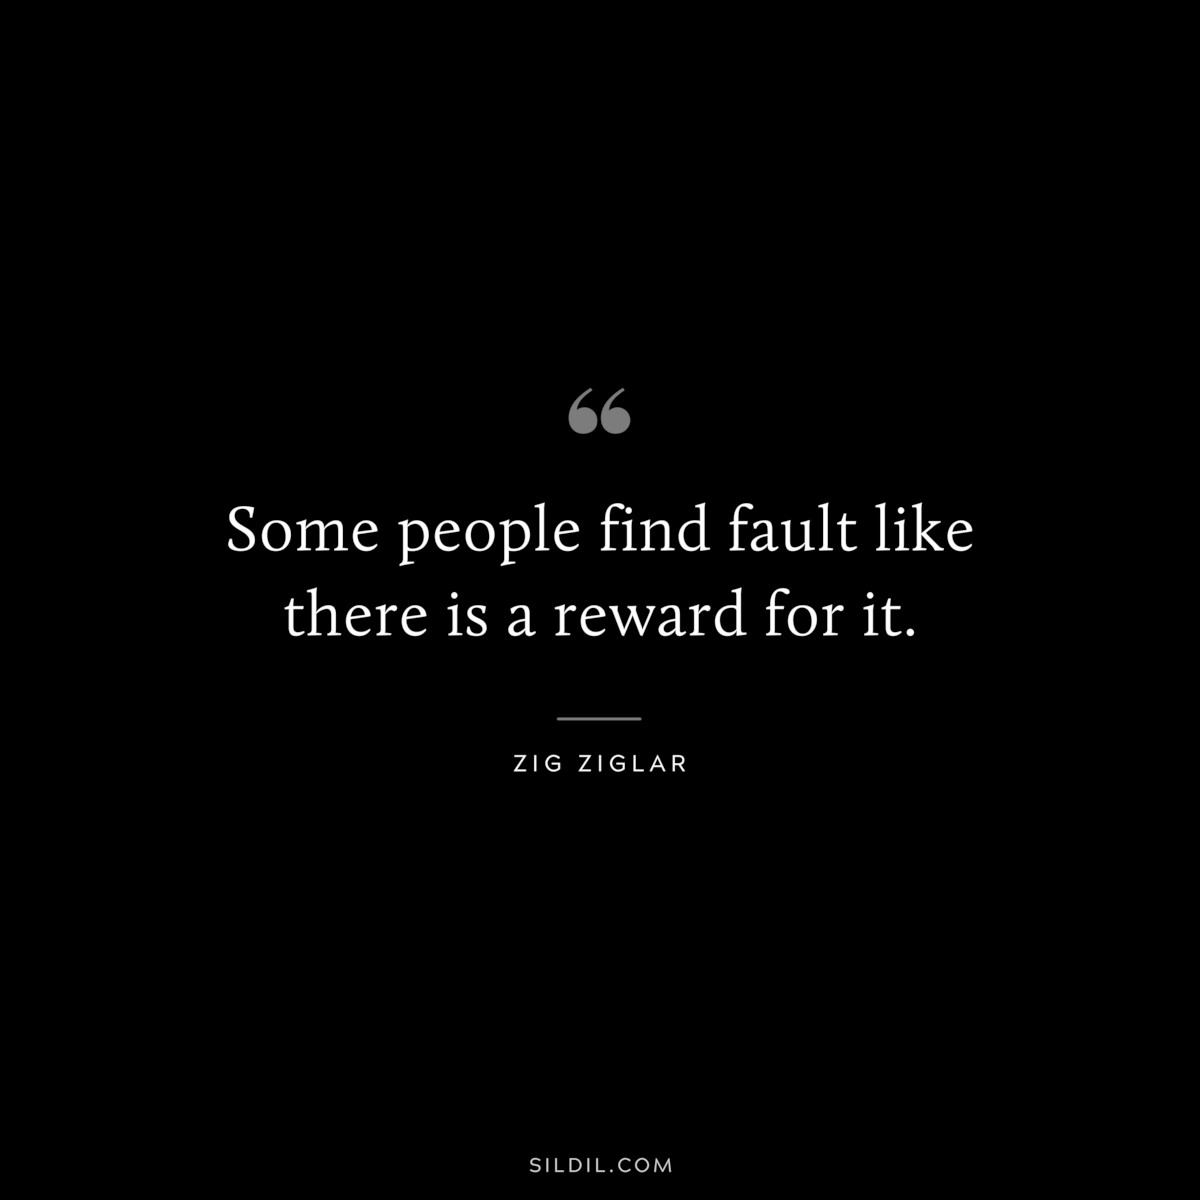 Some people find fault like there is a reward for it. ― Zig Ziglar